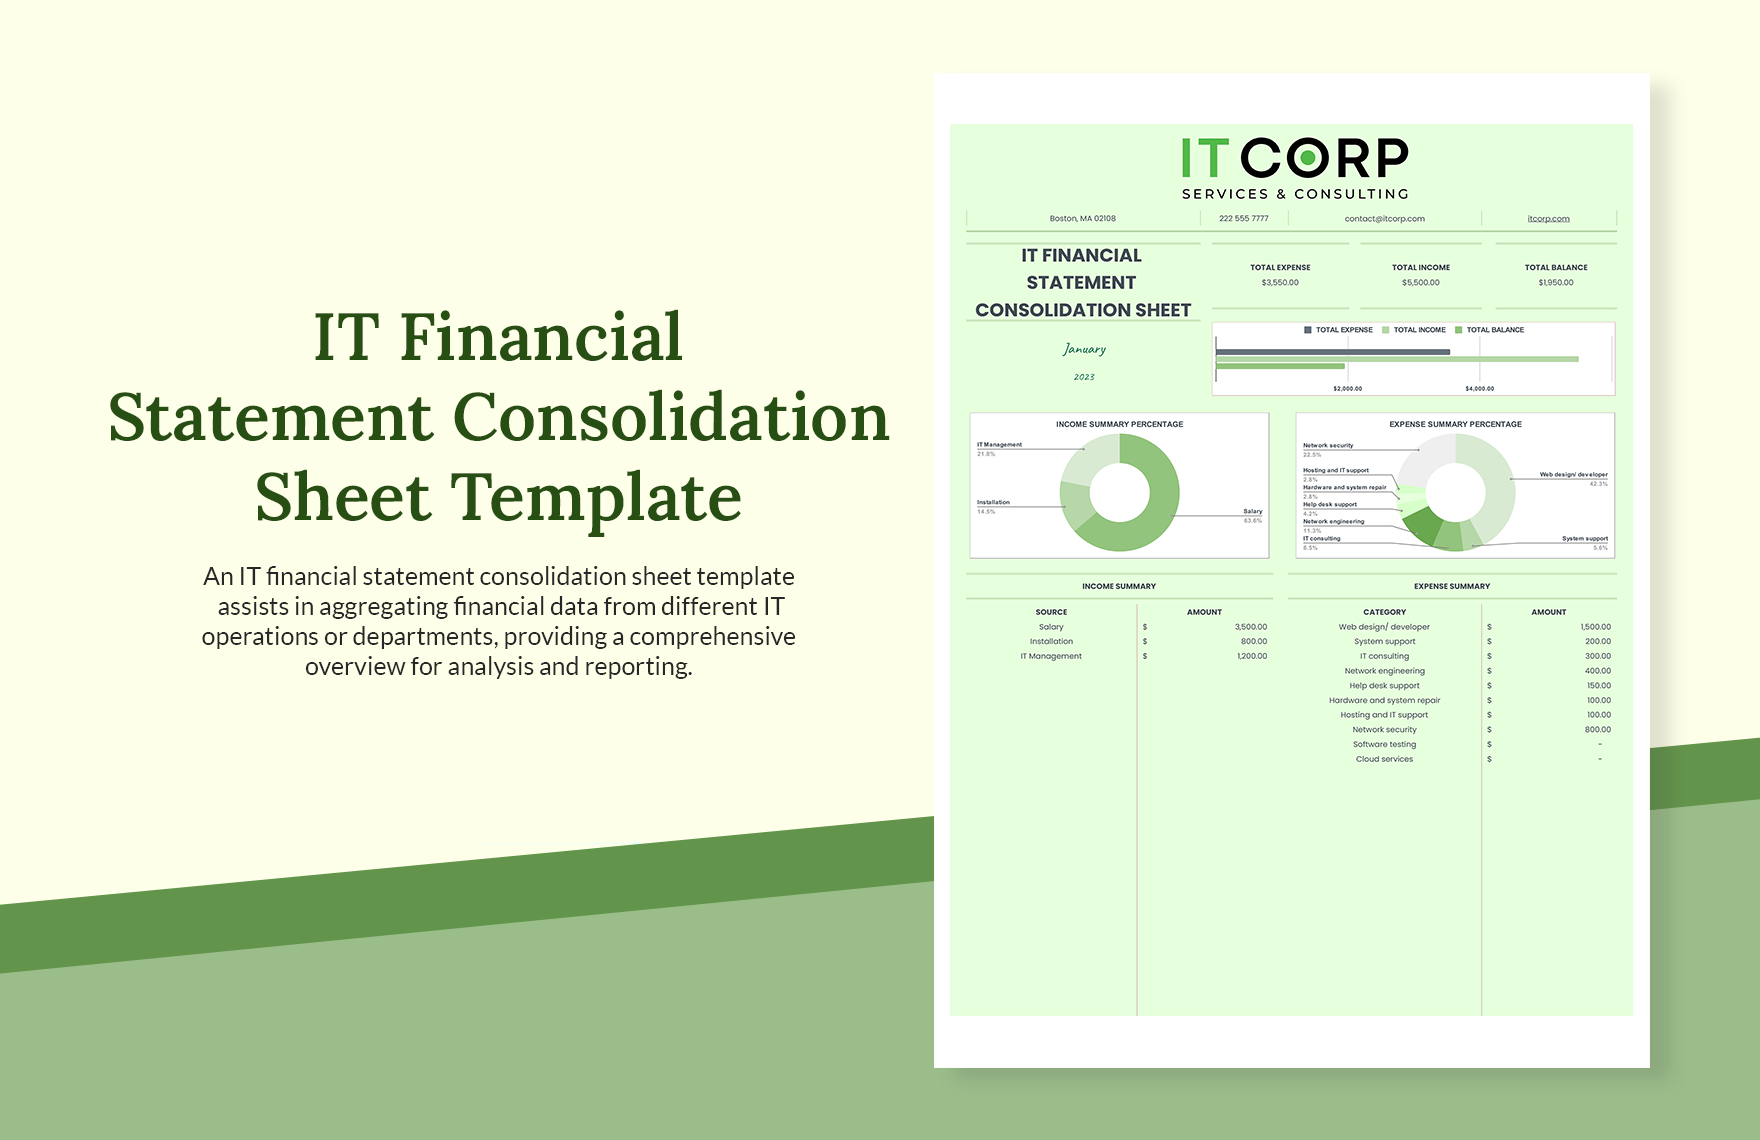 IT Financial Statement Consolidation Sheet Template